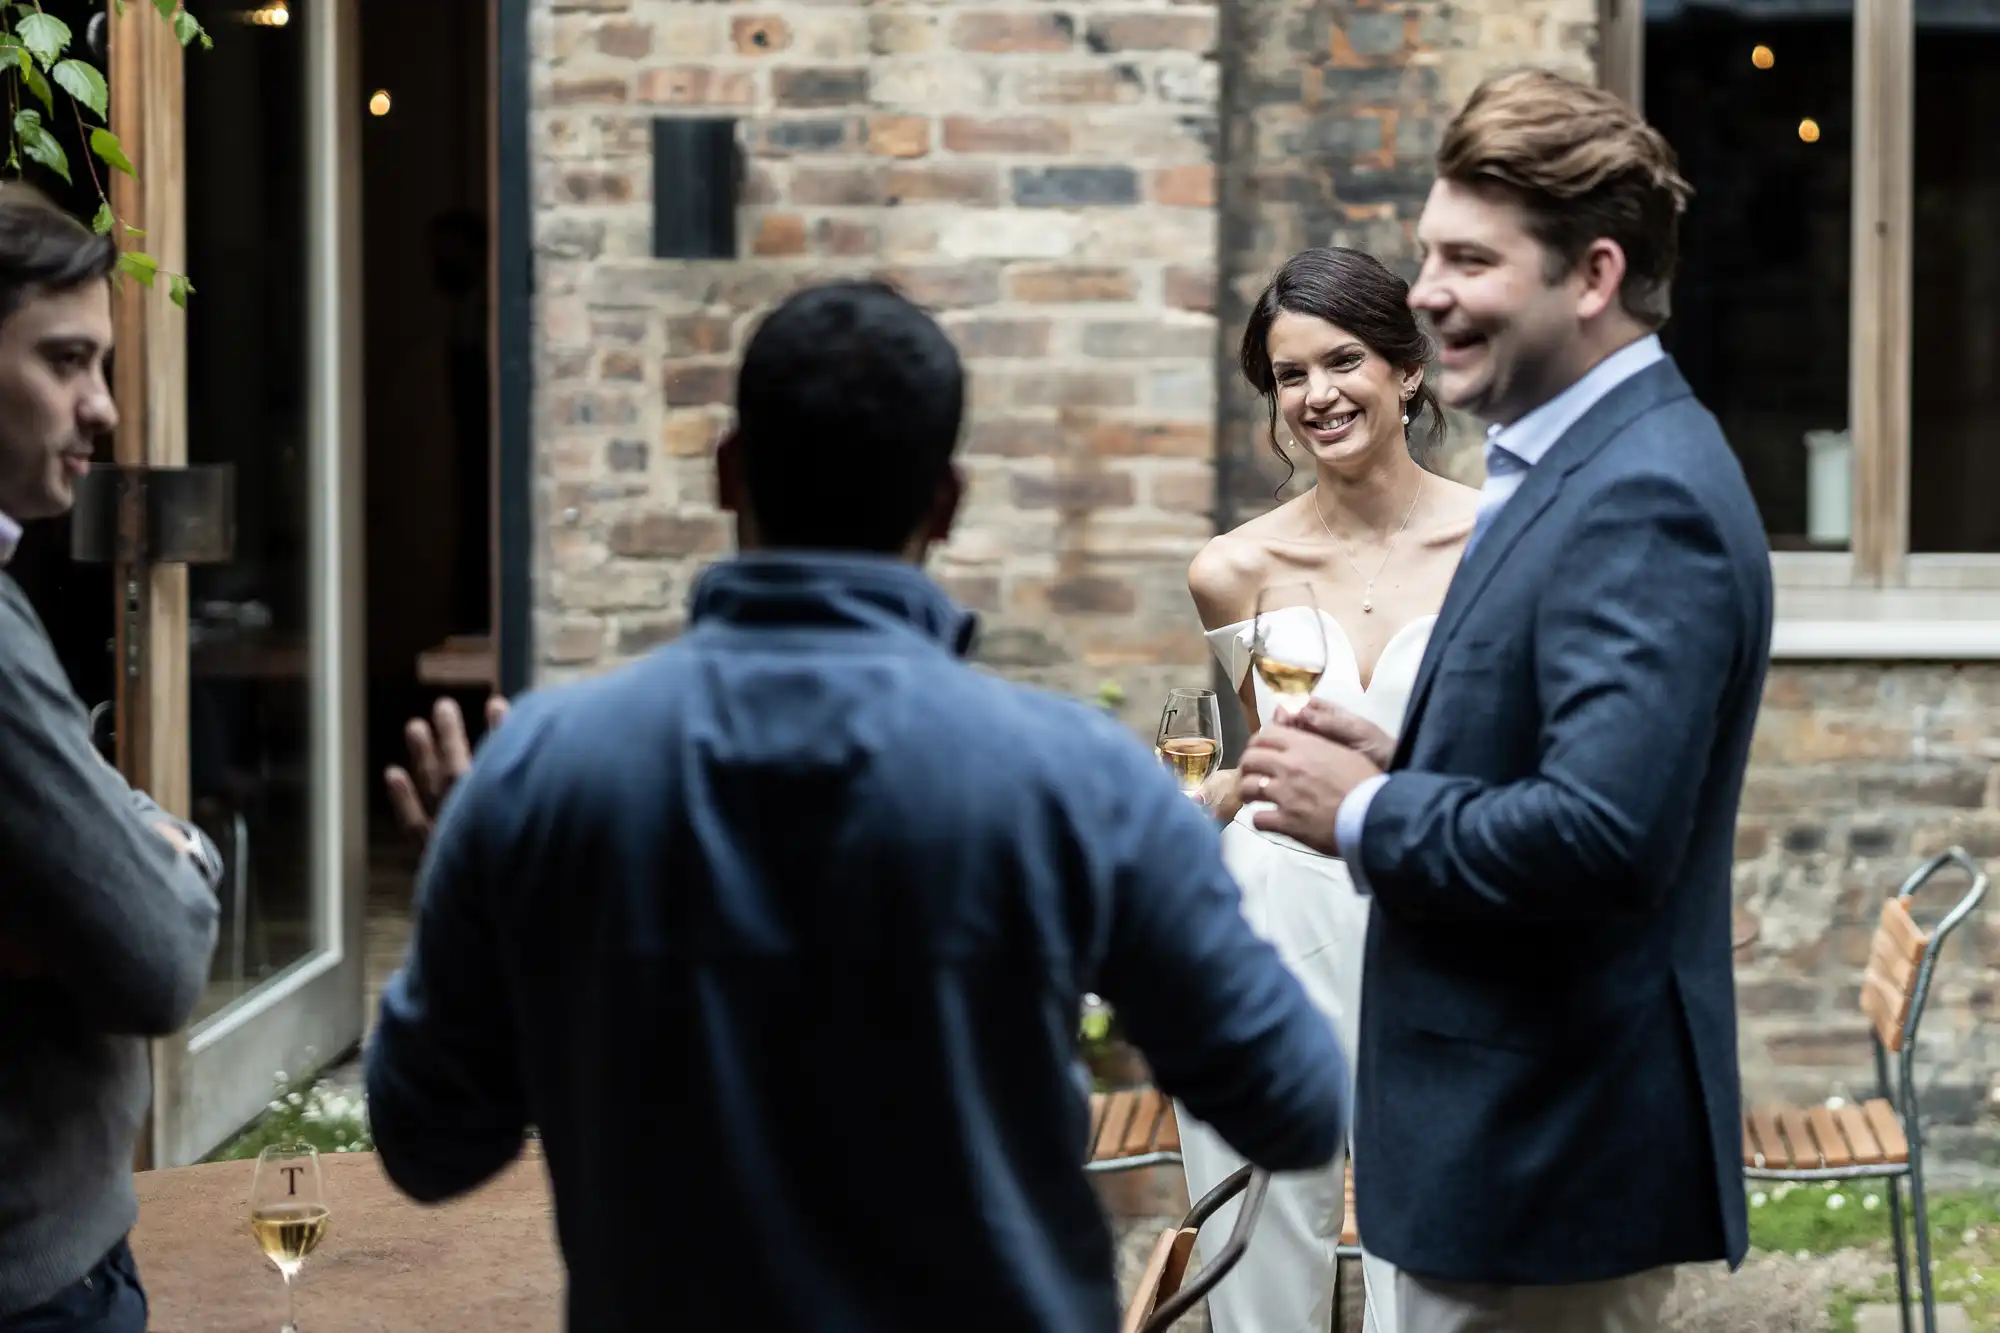 A newlywed couple having a conversation with a guest during their outdoor wedding reception, all smiling and holding drinks.